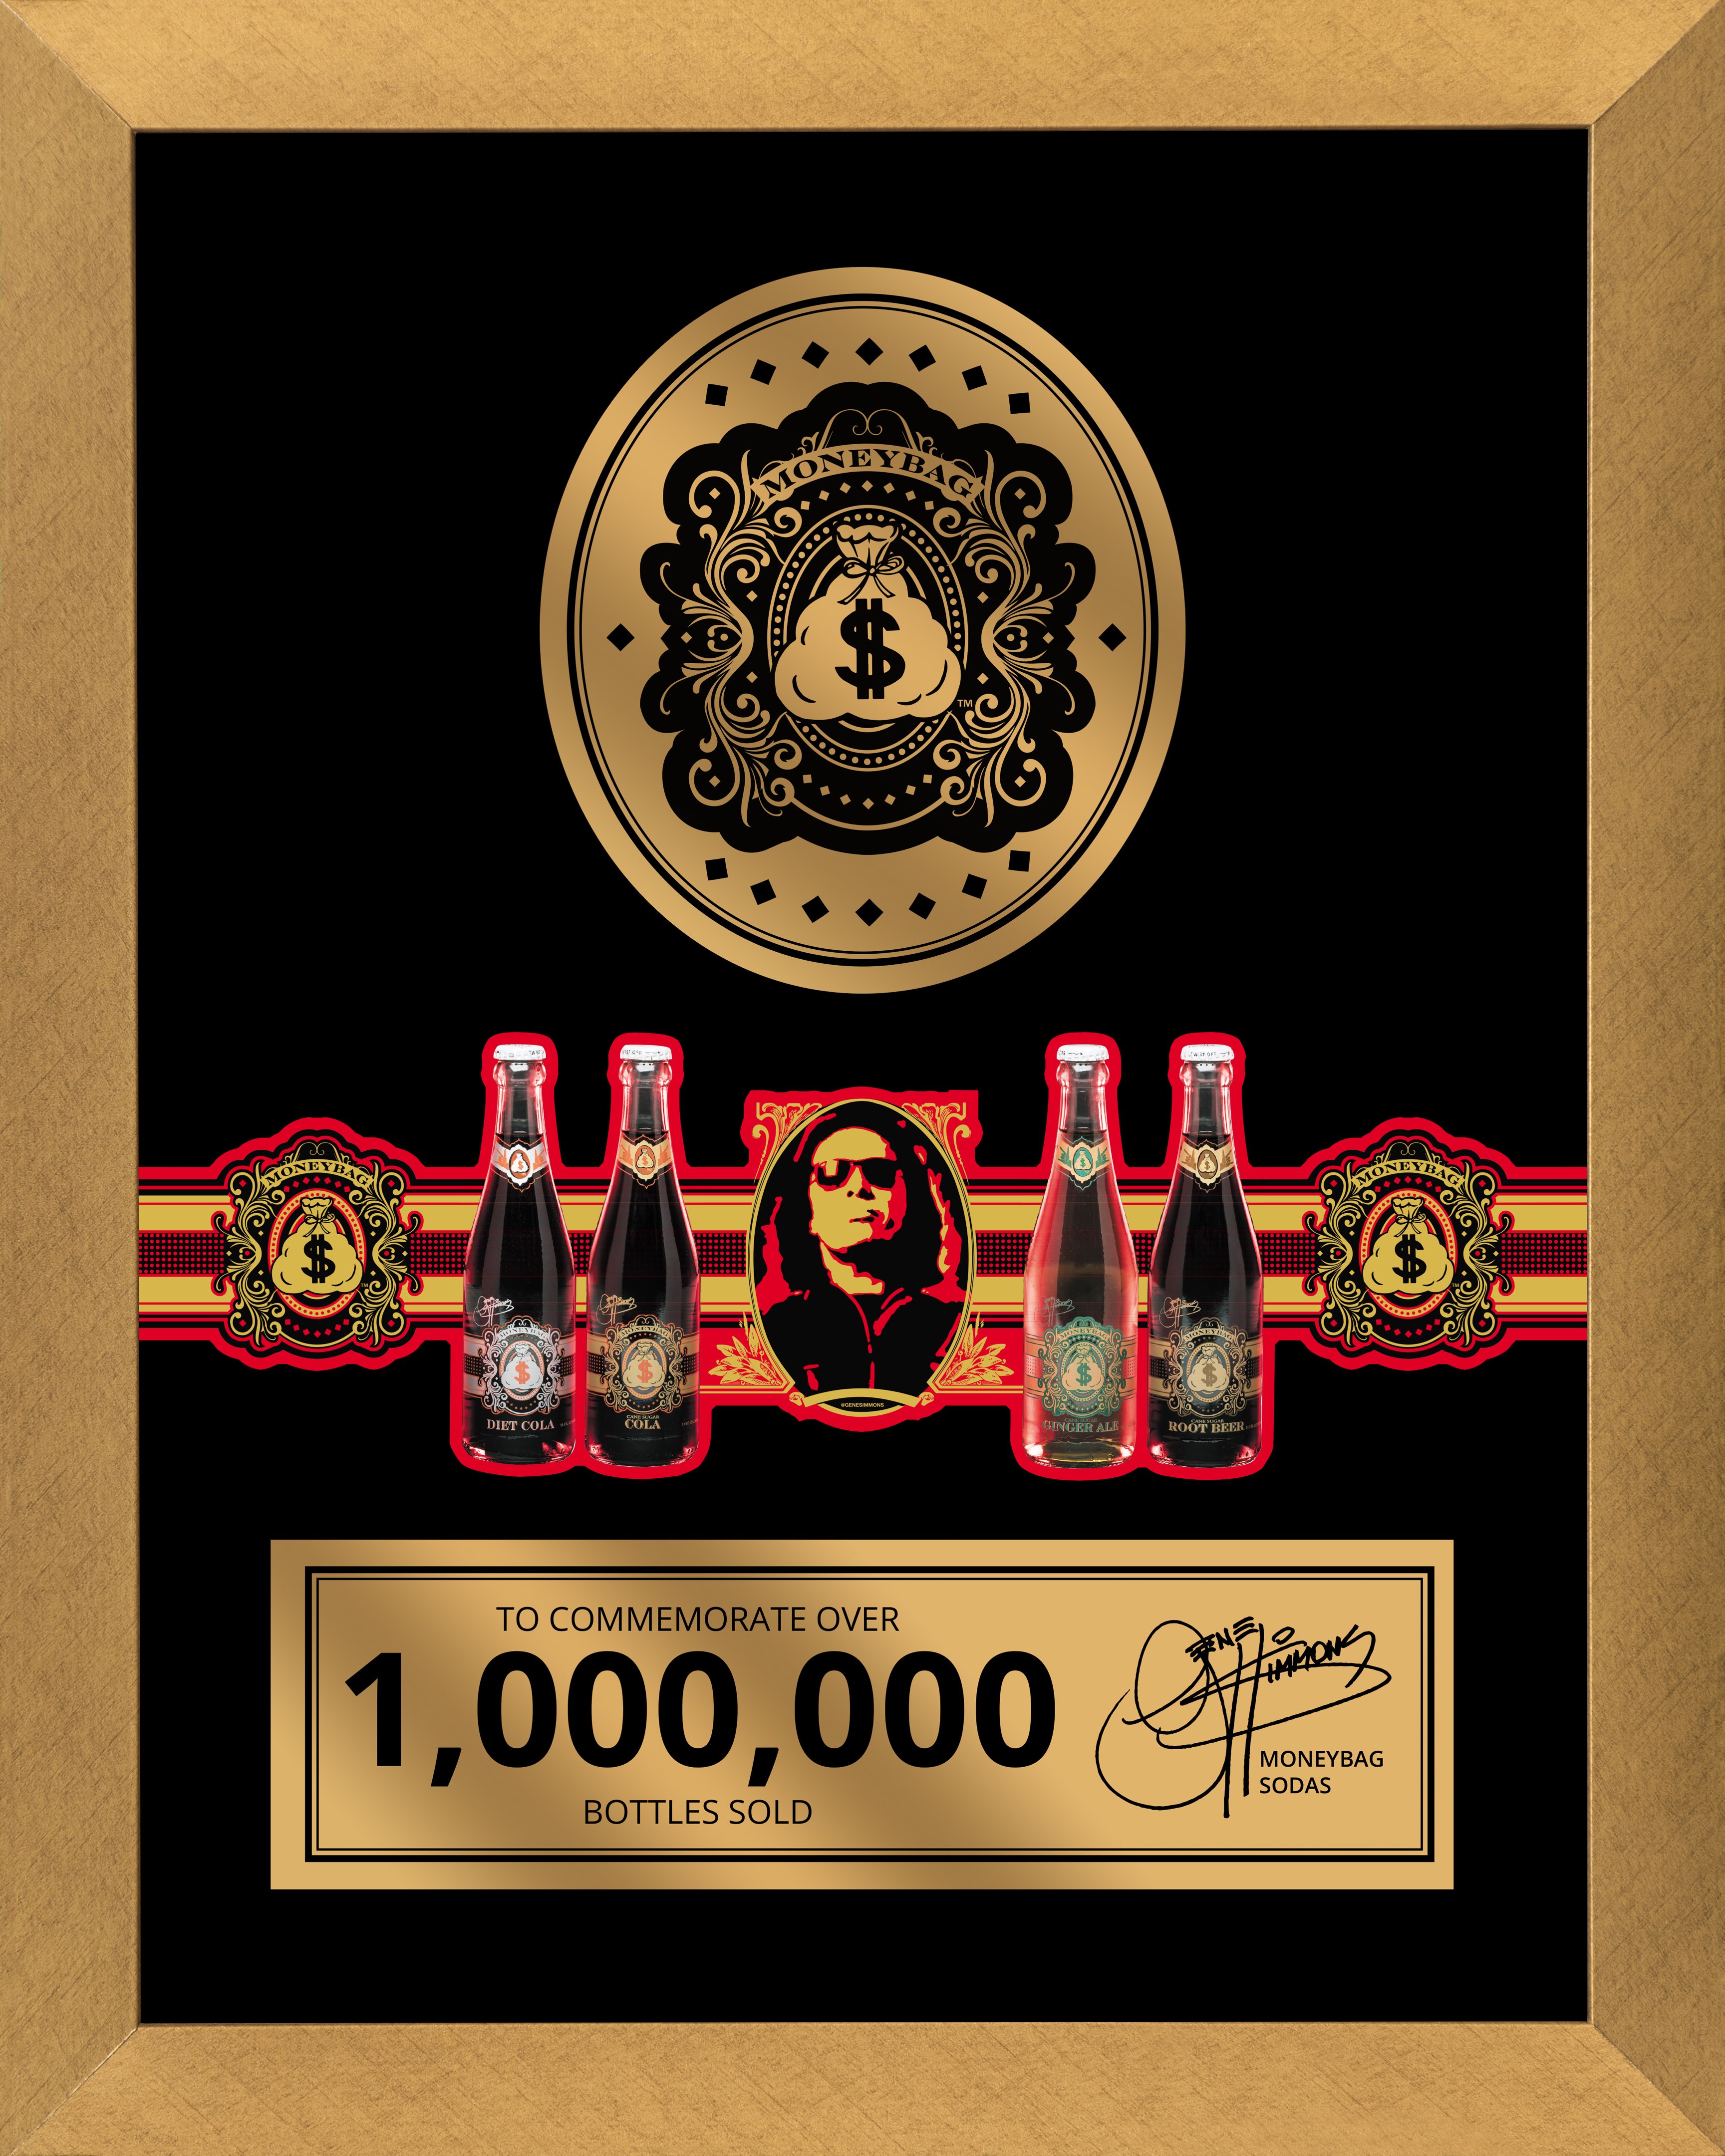 Gene Simmons Moneybag Sodas Ships One Million Bottles, Announces Vacation Like a Rock Star Contest!